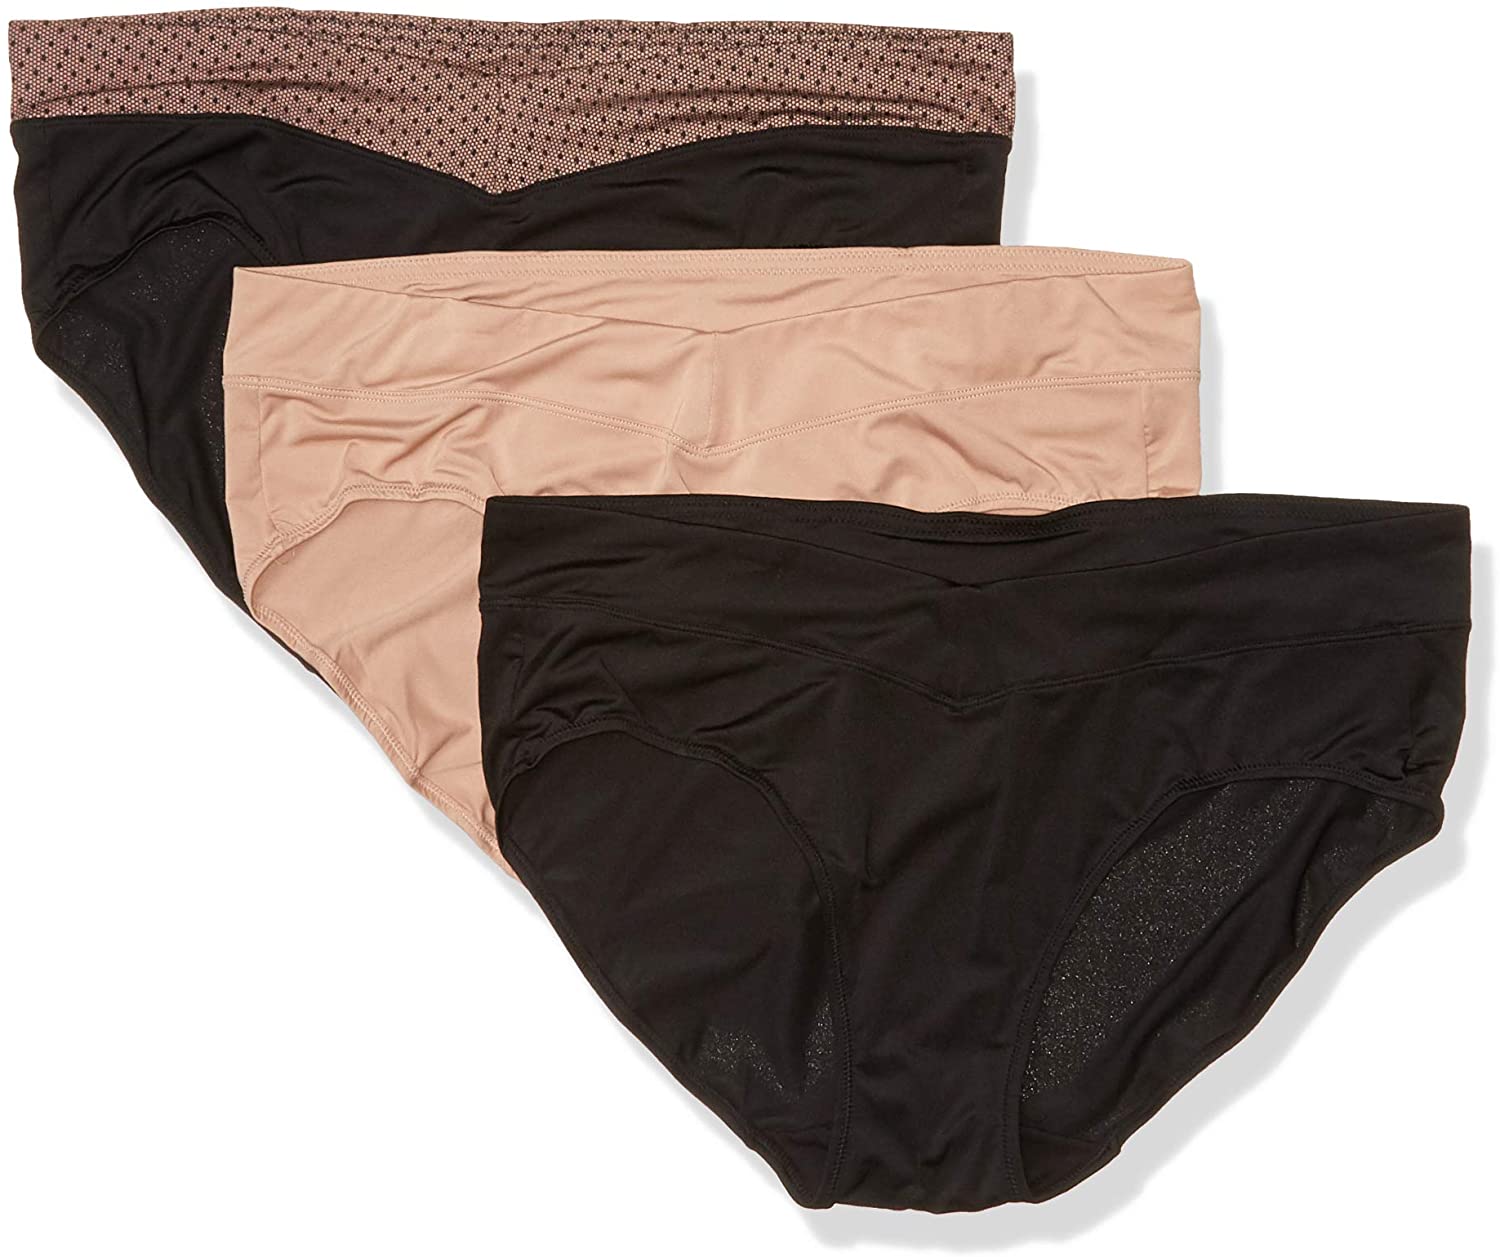 Warner's Women's Blissful Benefits No Muffin Top 3 Pack Hipster Panty  X-Large